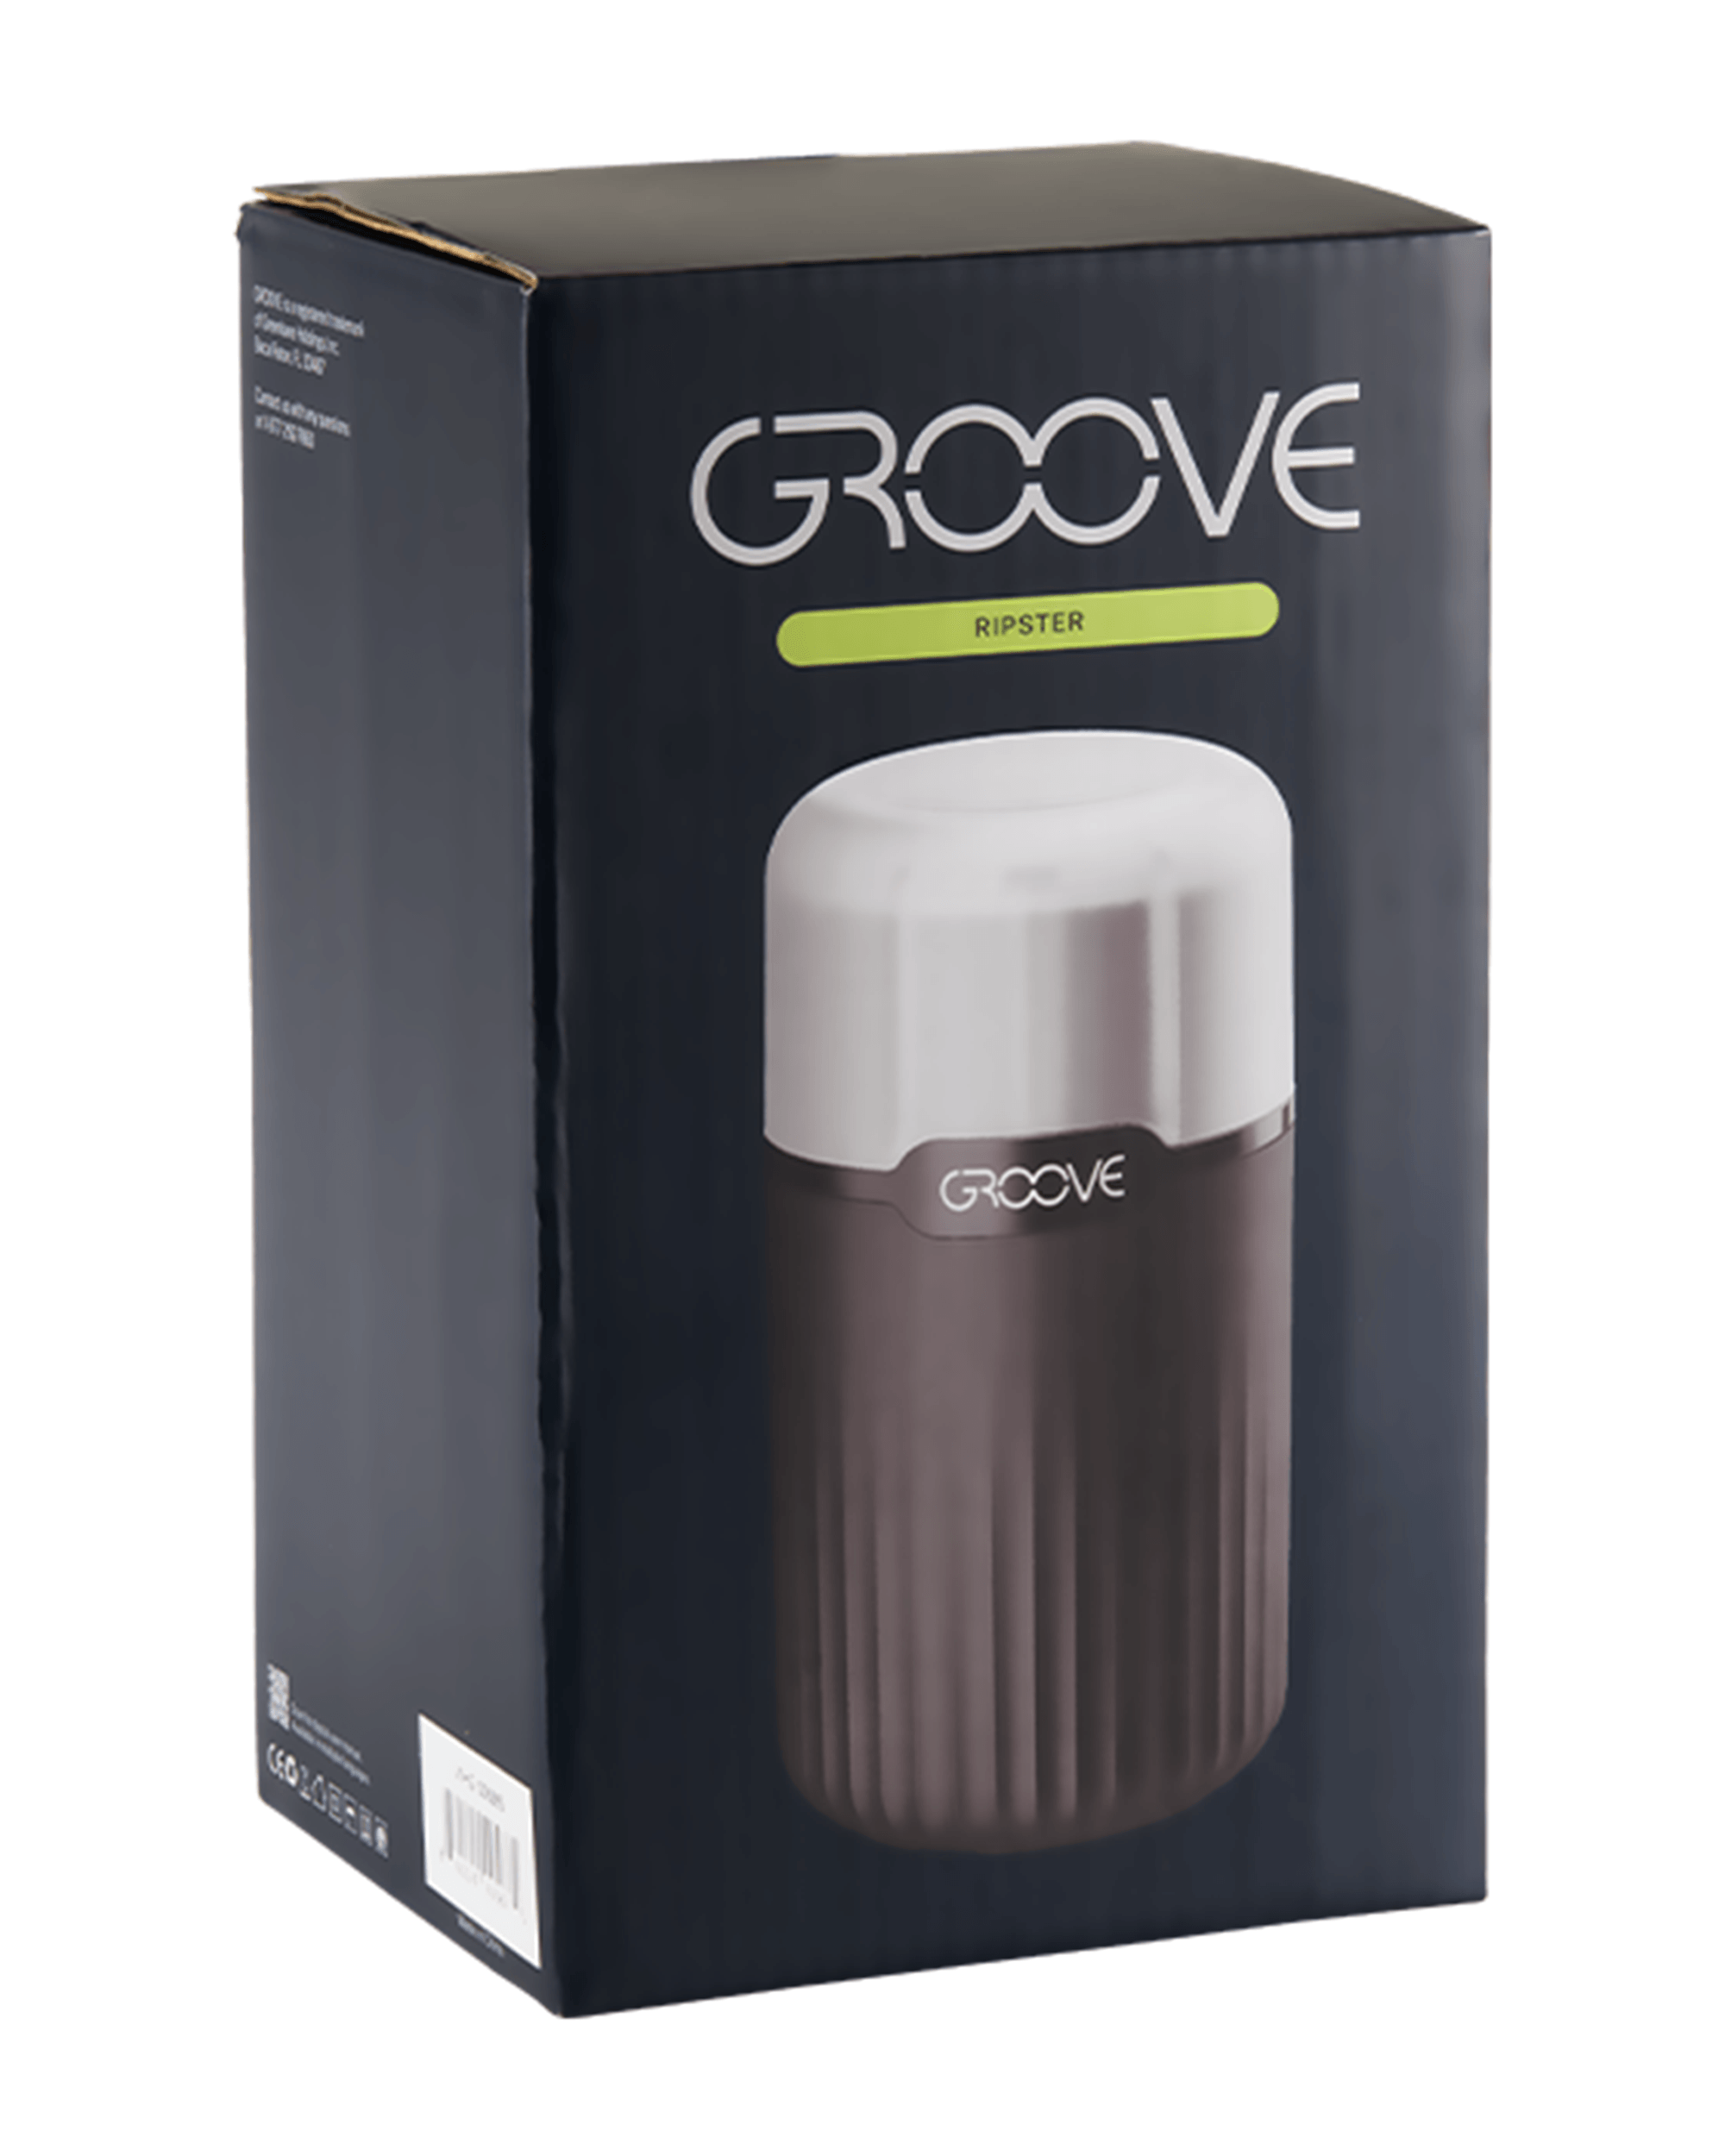 Groove | Ripster Stainless Steel Electric Grinder w/ See Through Window | 3 Piece - 70mm - Black - 8